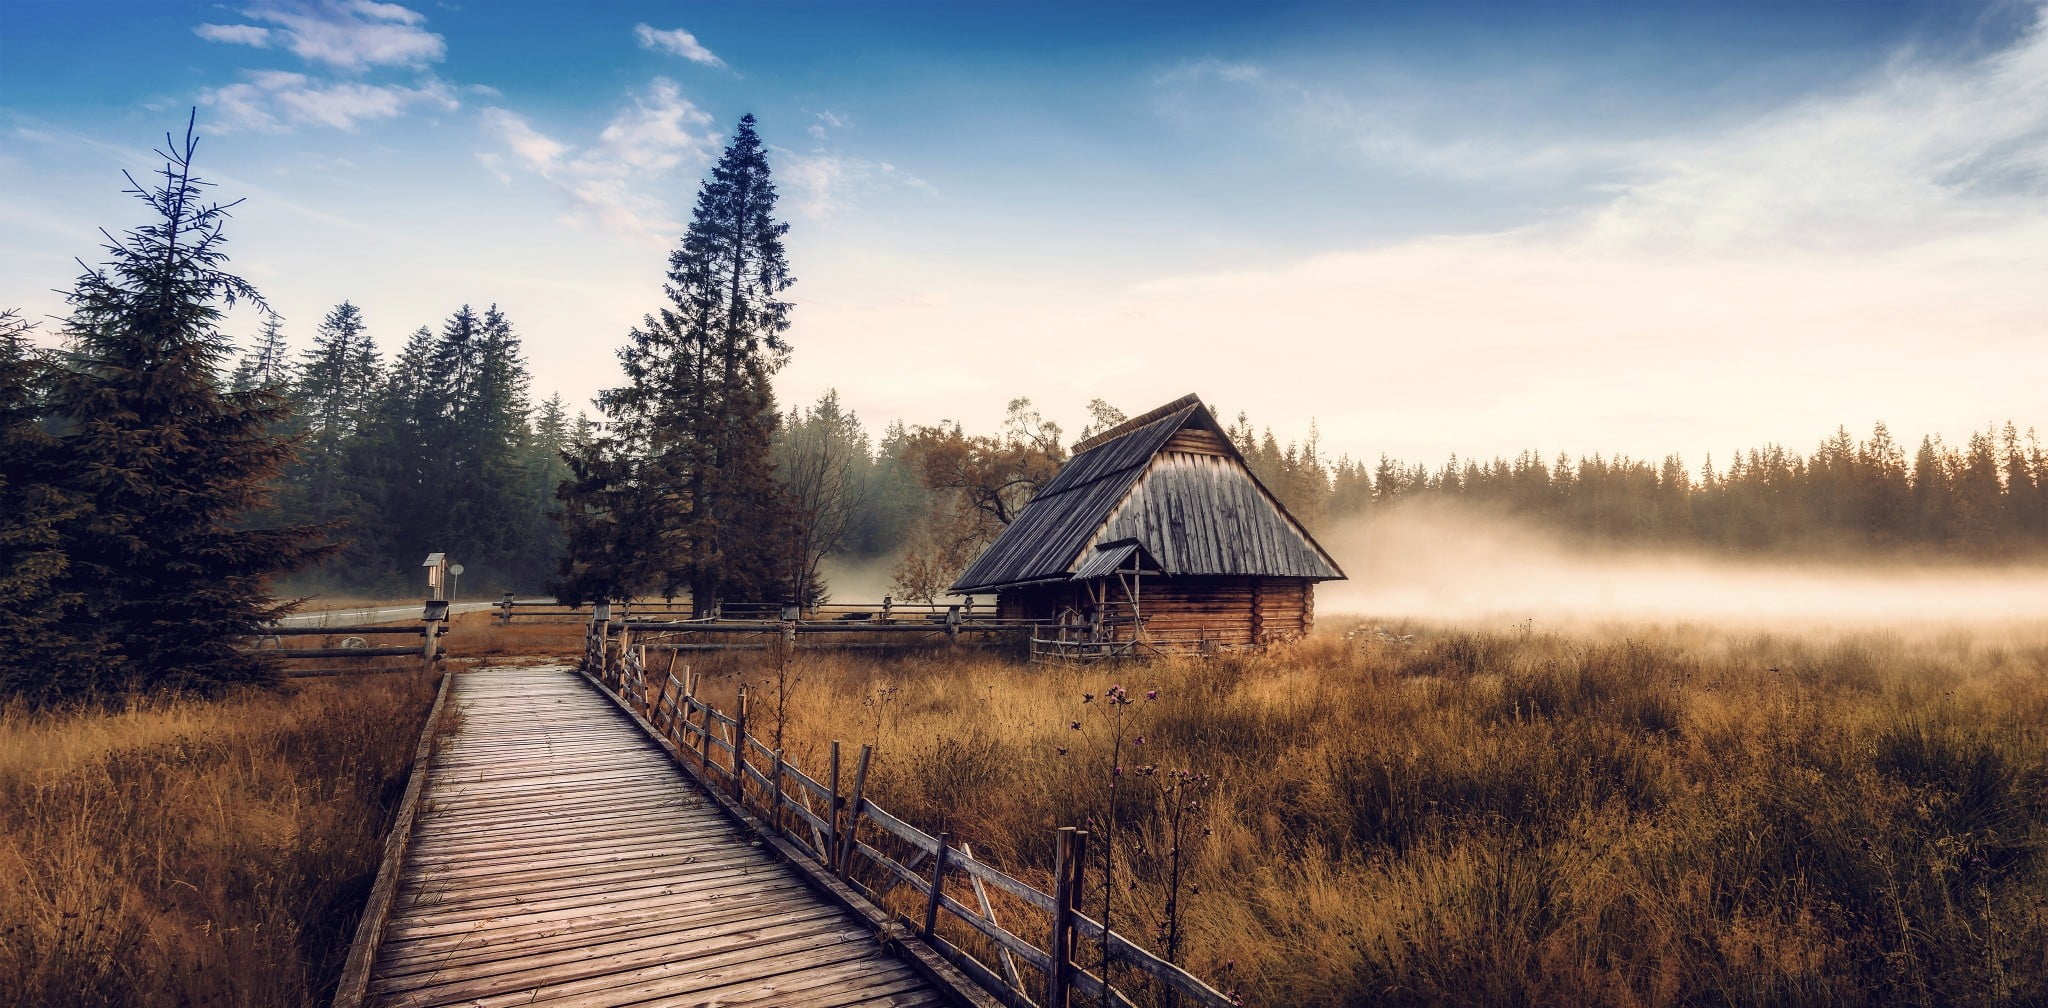 house near trees, nature, landscape, cabin, mist, fall, forest